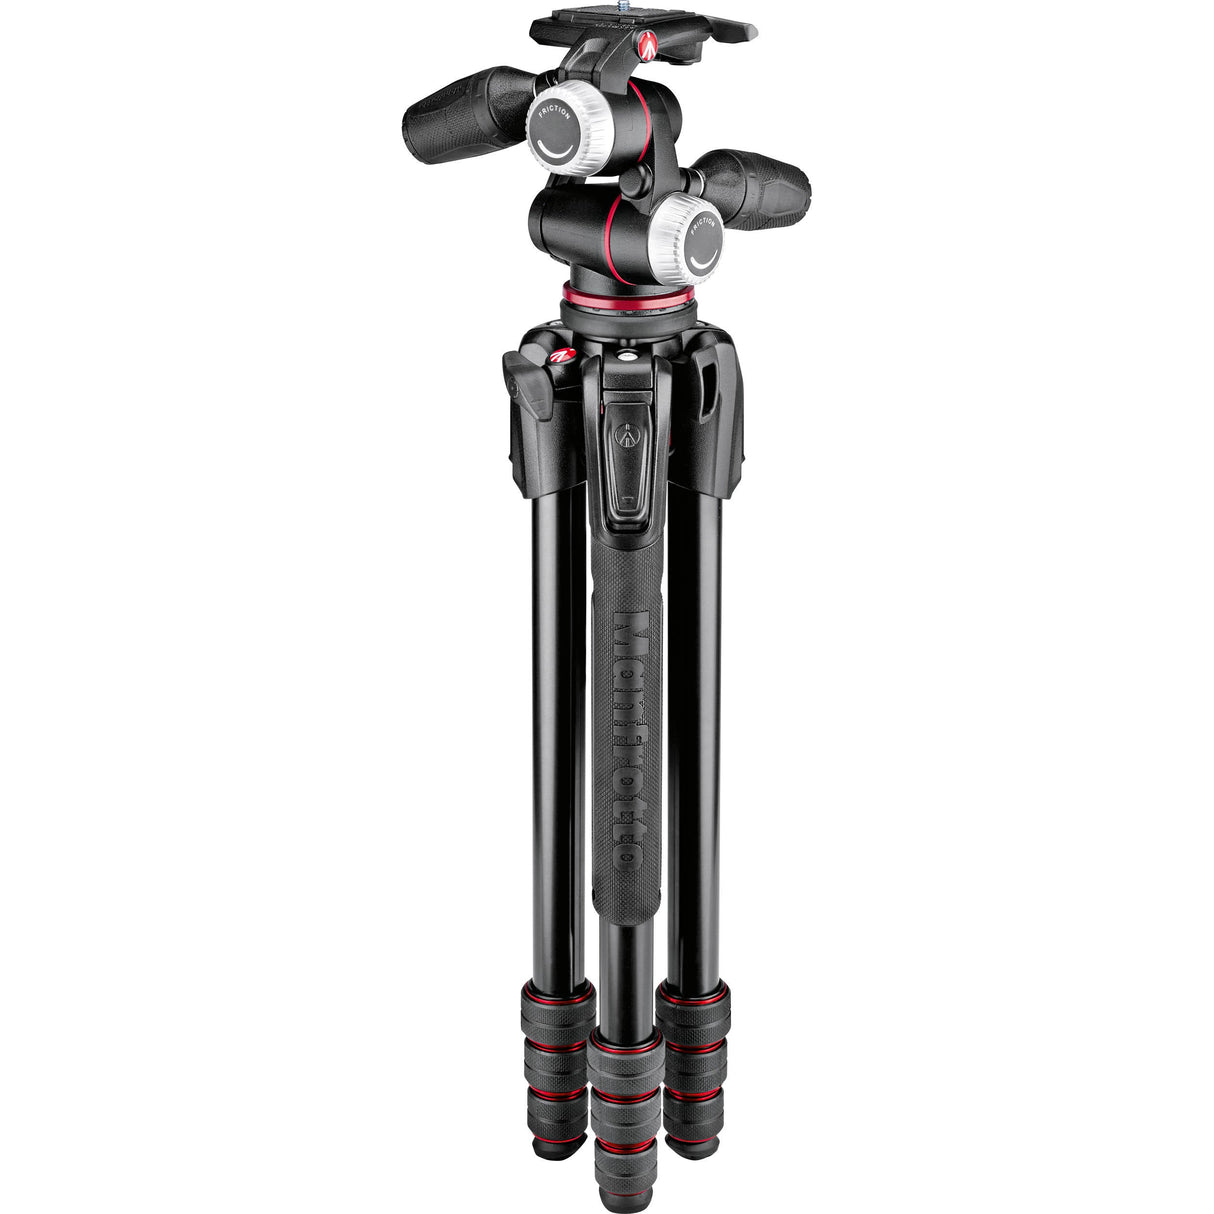 Manfrotto 190go! Aluminum M-Series Tripod with MHXPRO-3W 3-Way Pan/Tilt Head